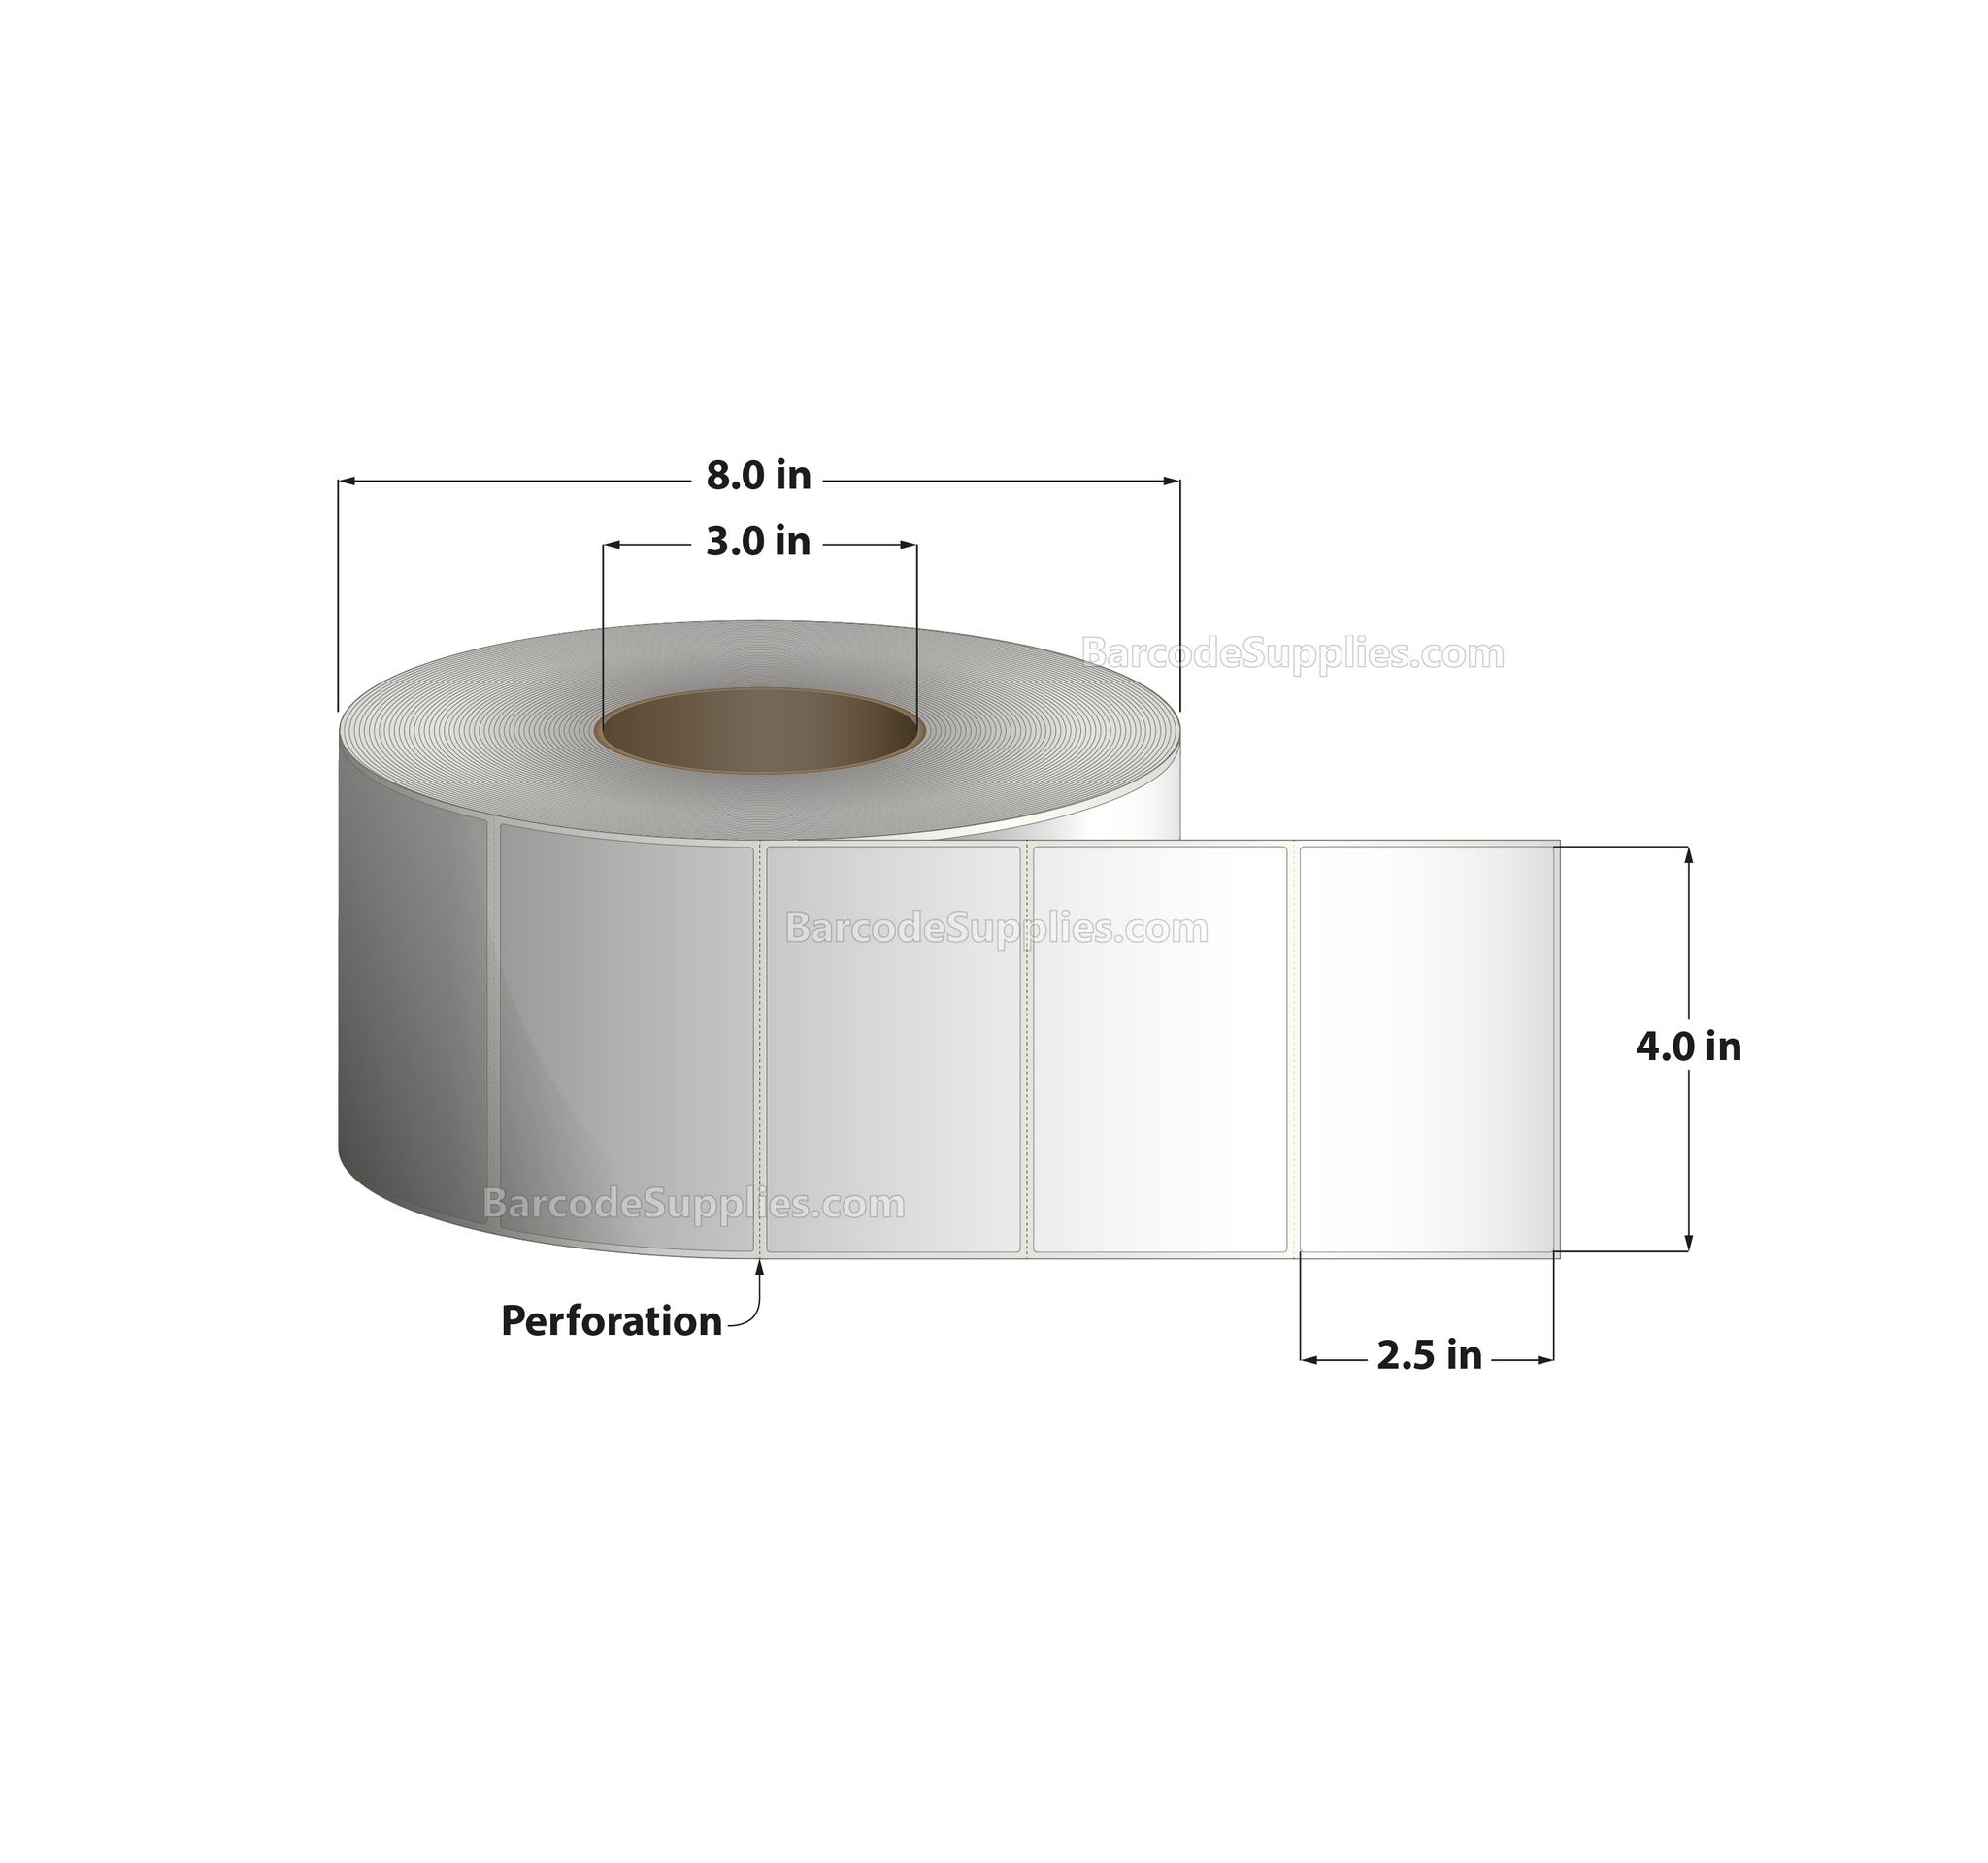 4 x 2.5 Thermal Transfer White Labels With Permanent Adhesive - Perforated - 2500 Labels Per Roll - Carton Of 4 Rolls - 10000 Labels Total - MPN: RT-4-25-2500-3